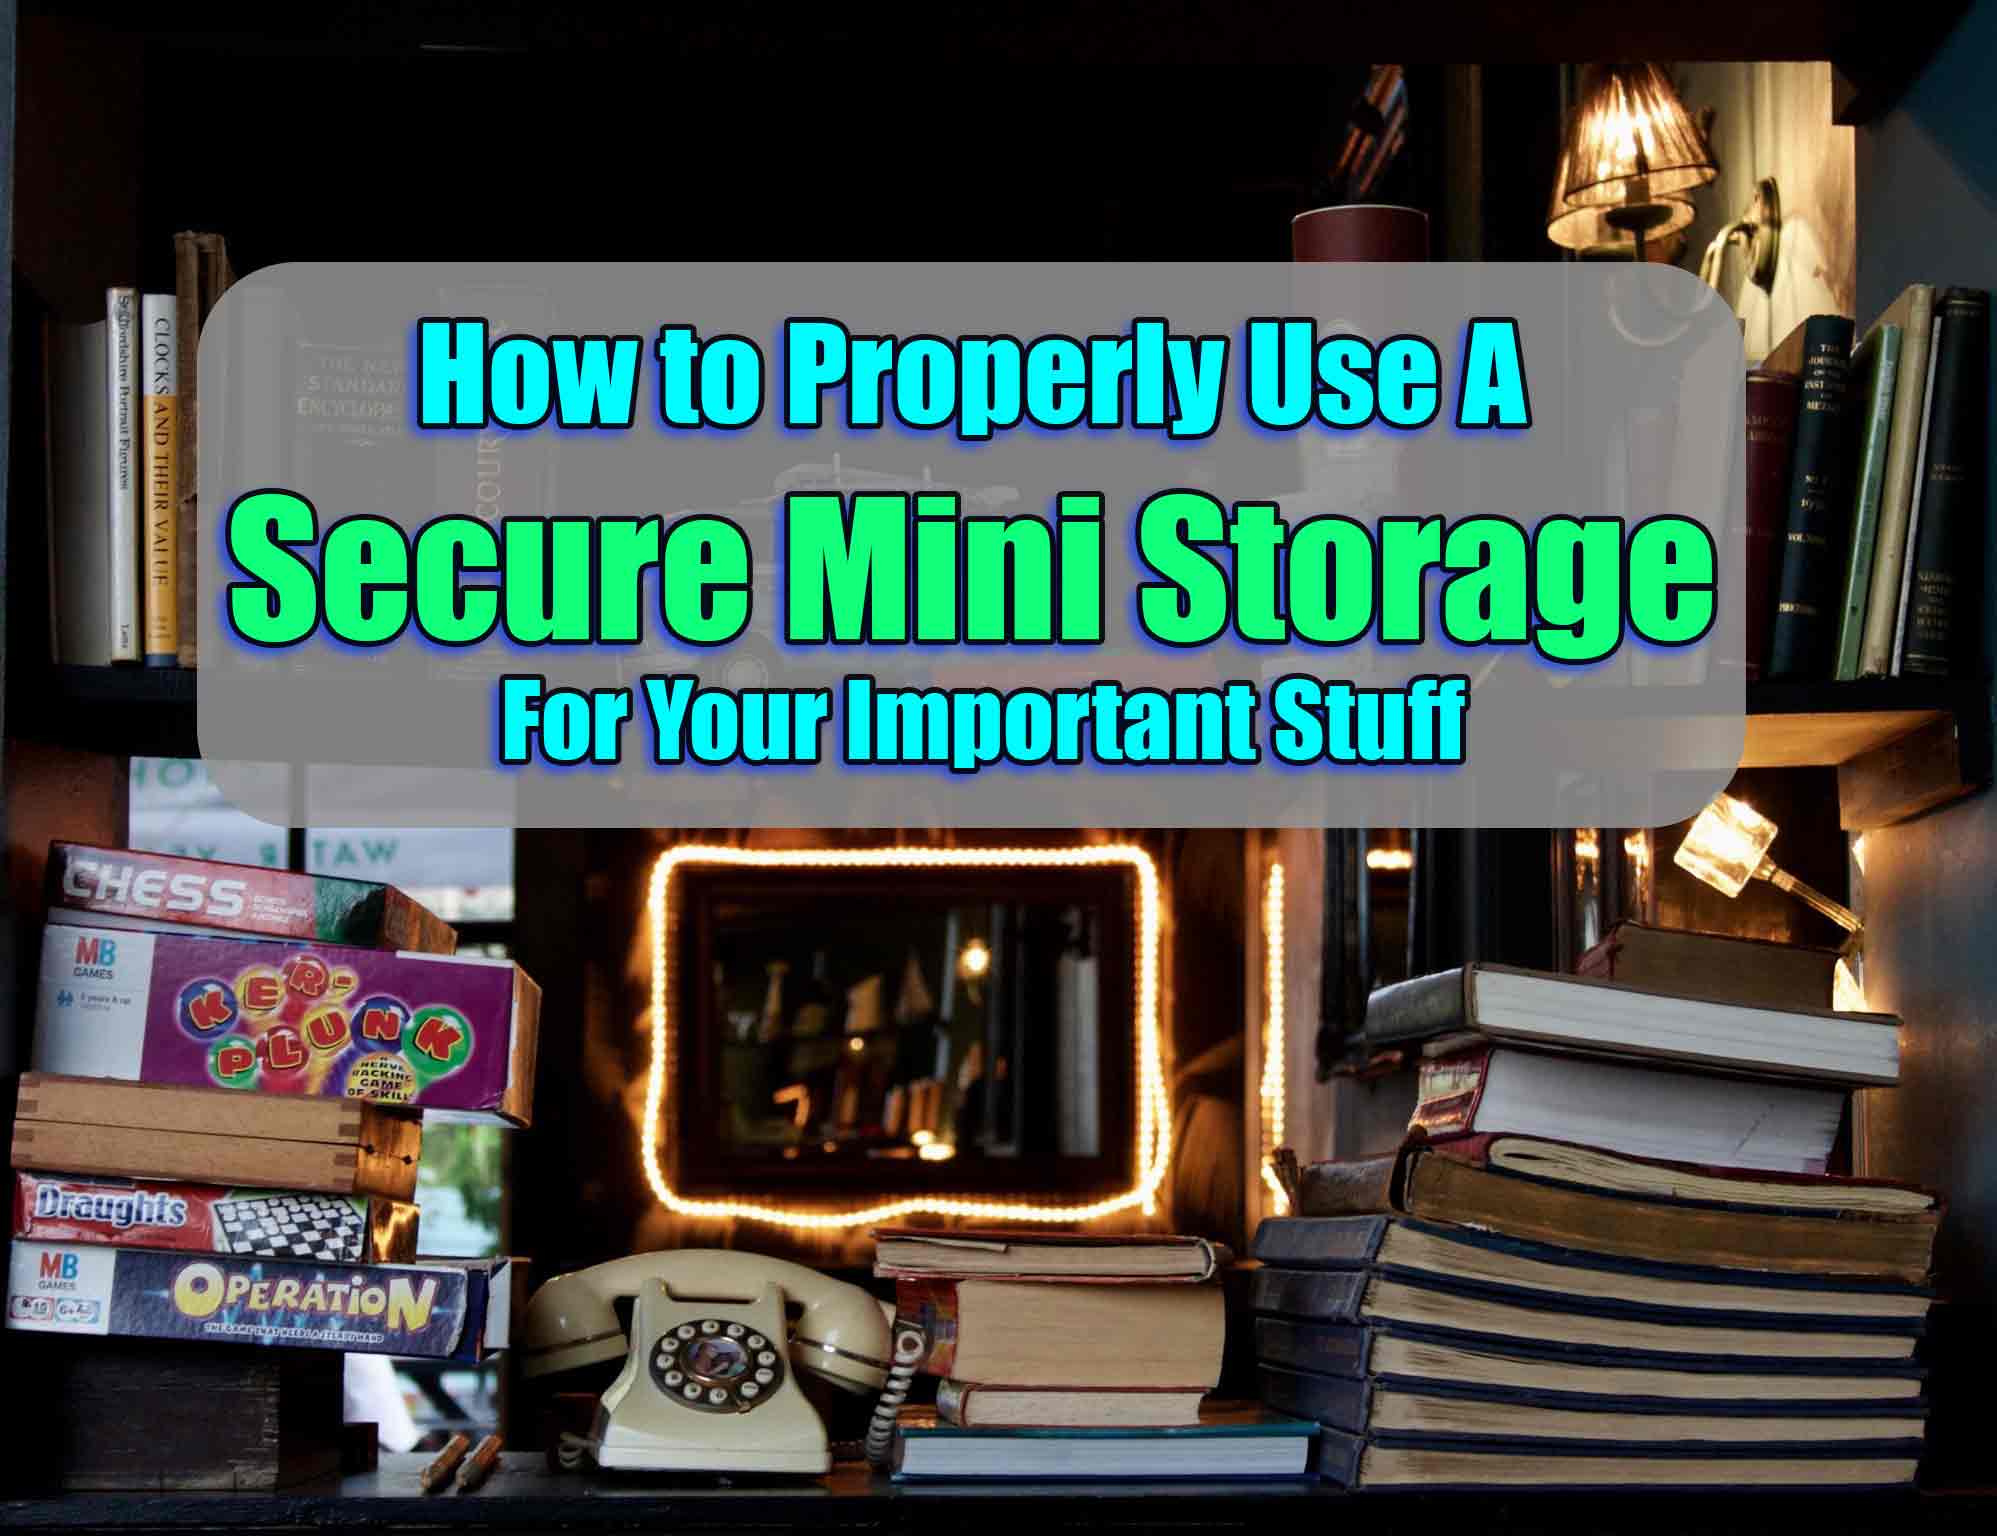 A Proper Use of a Secure Mini Storage for Your Important Stuff